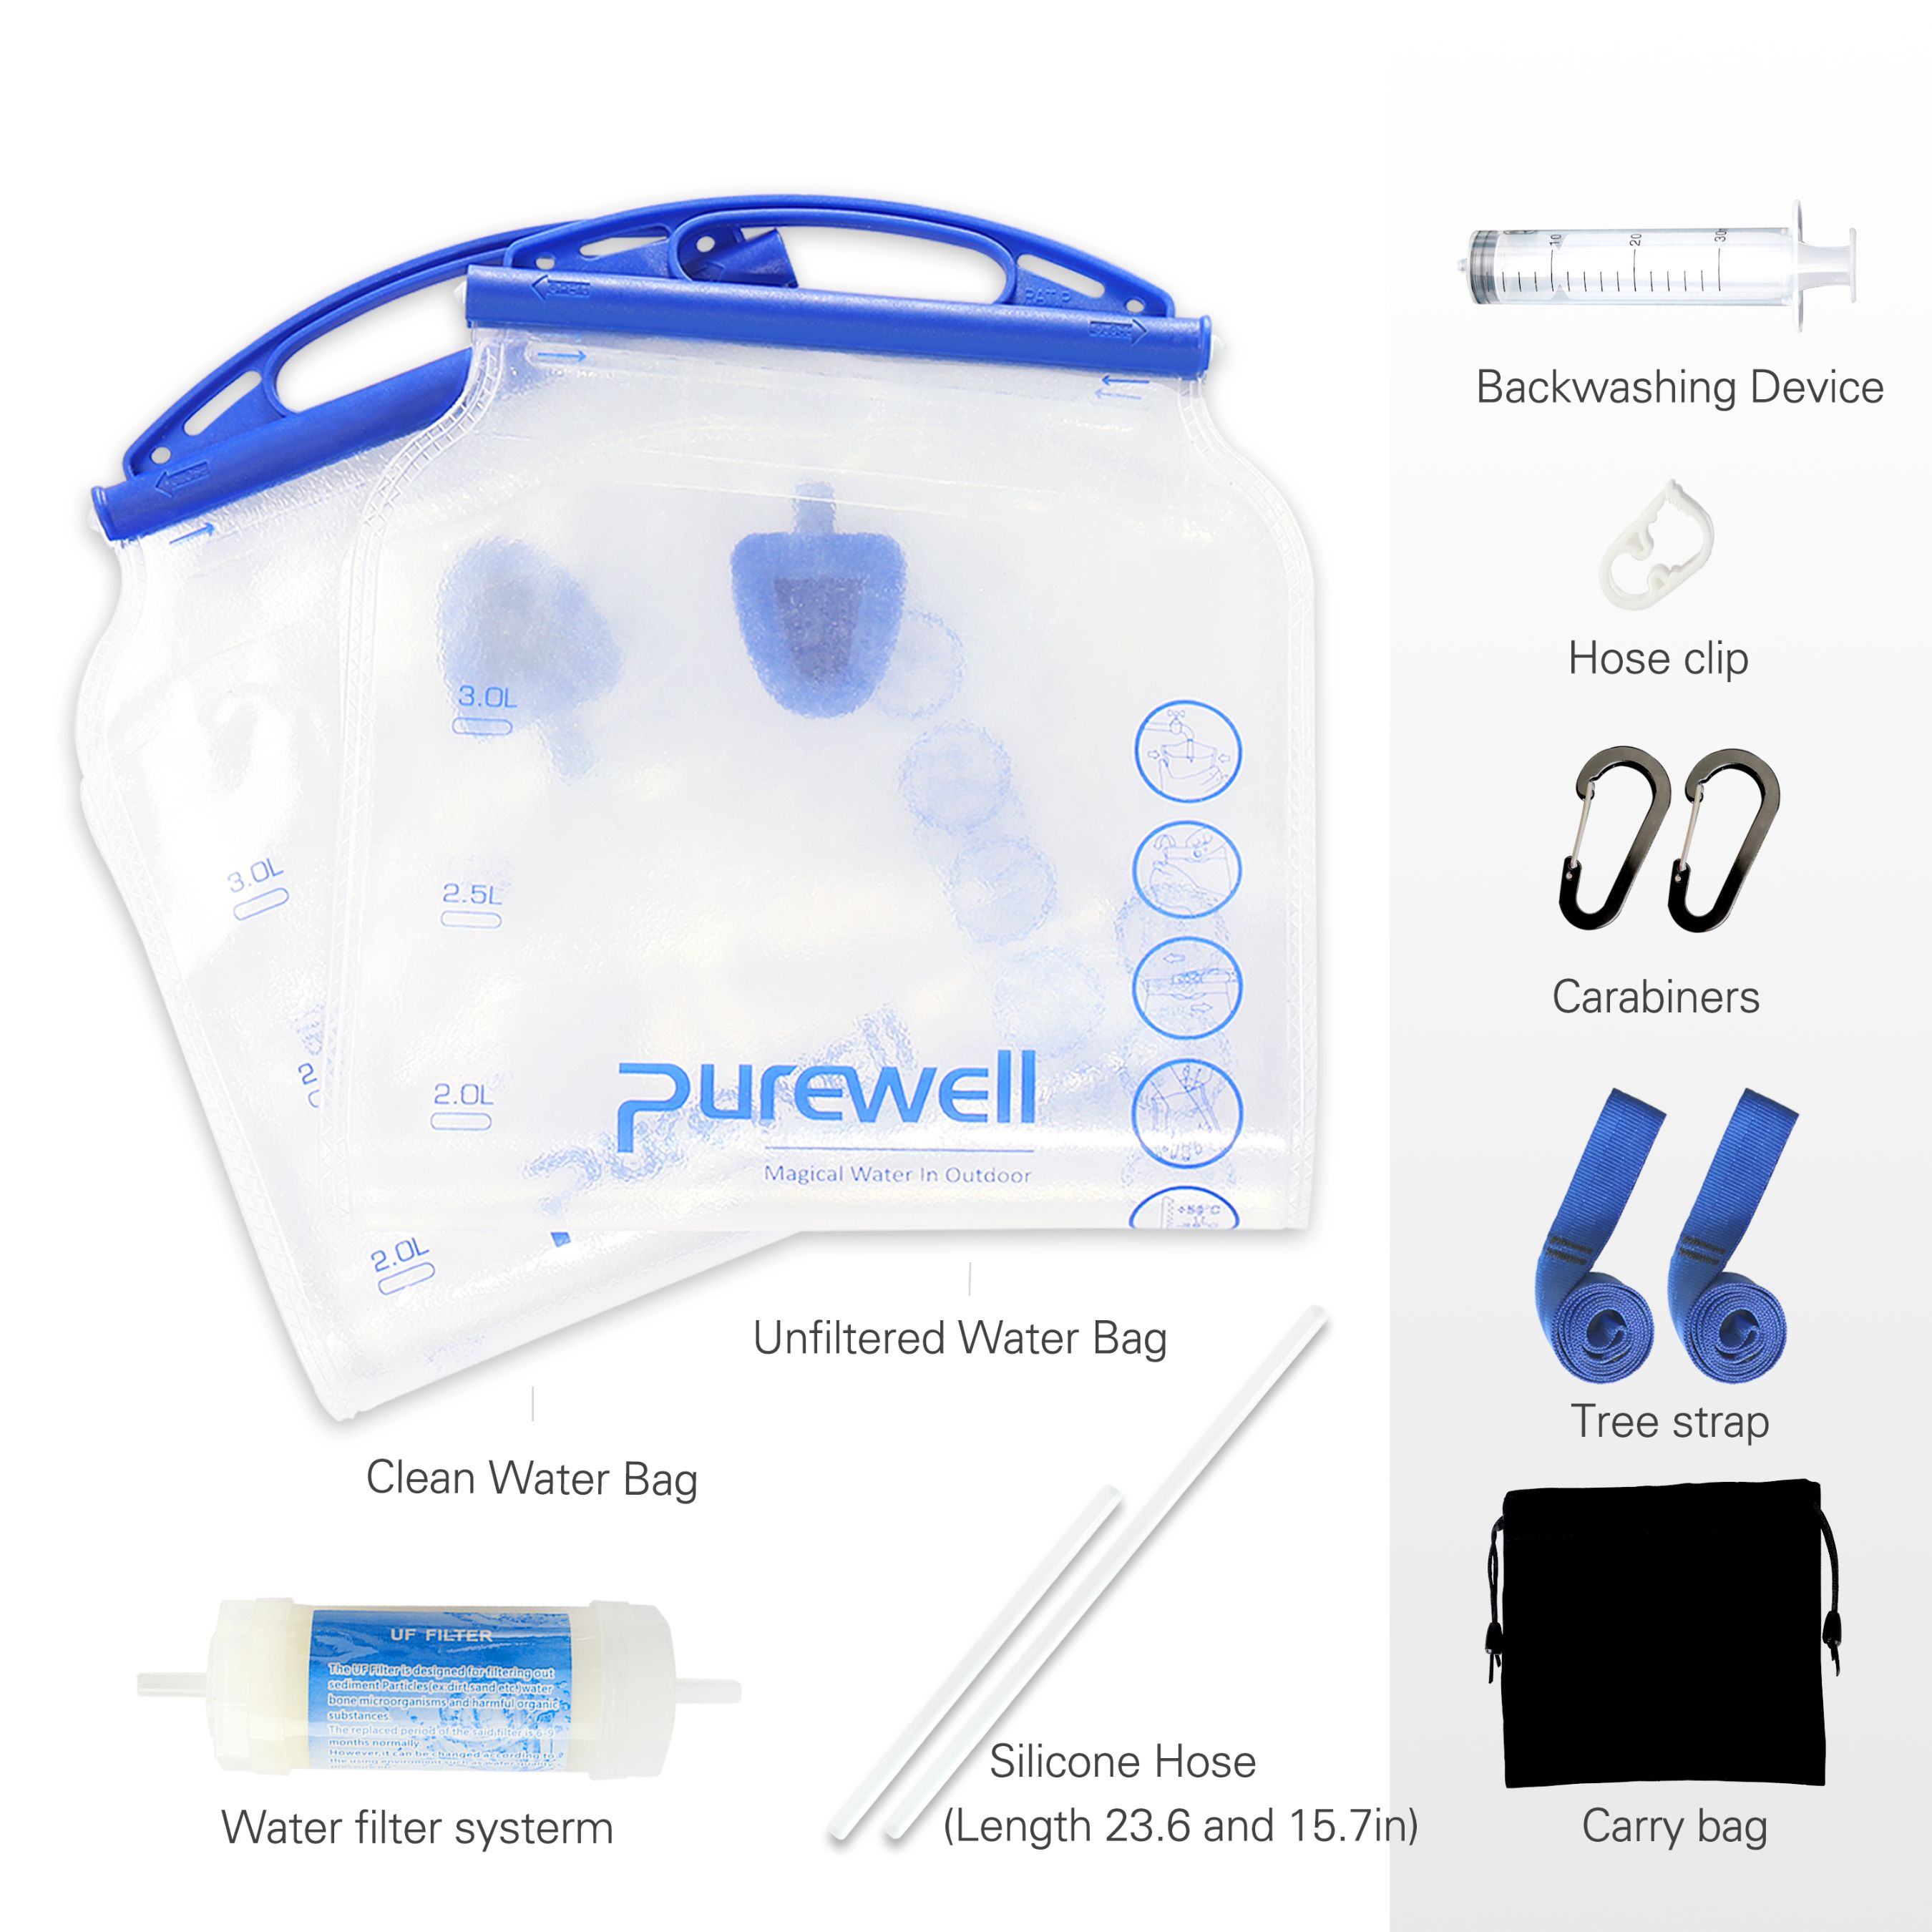 Purewell Array image451